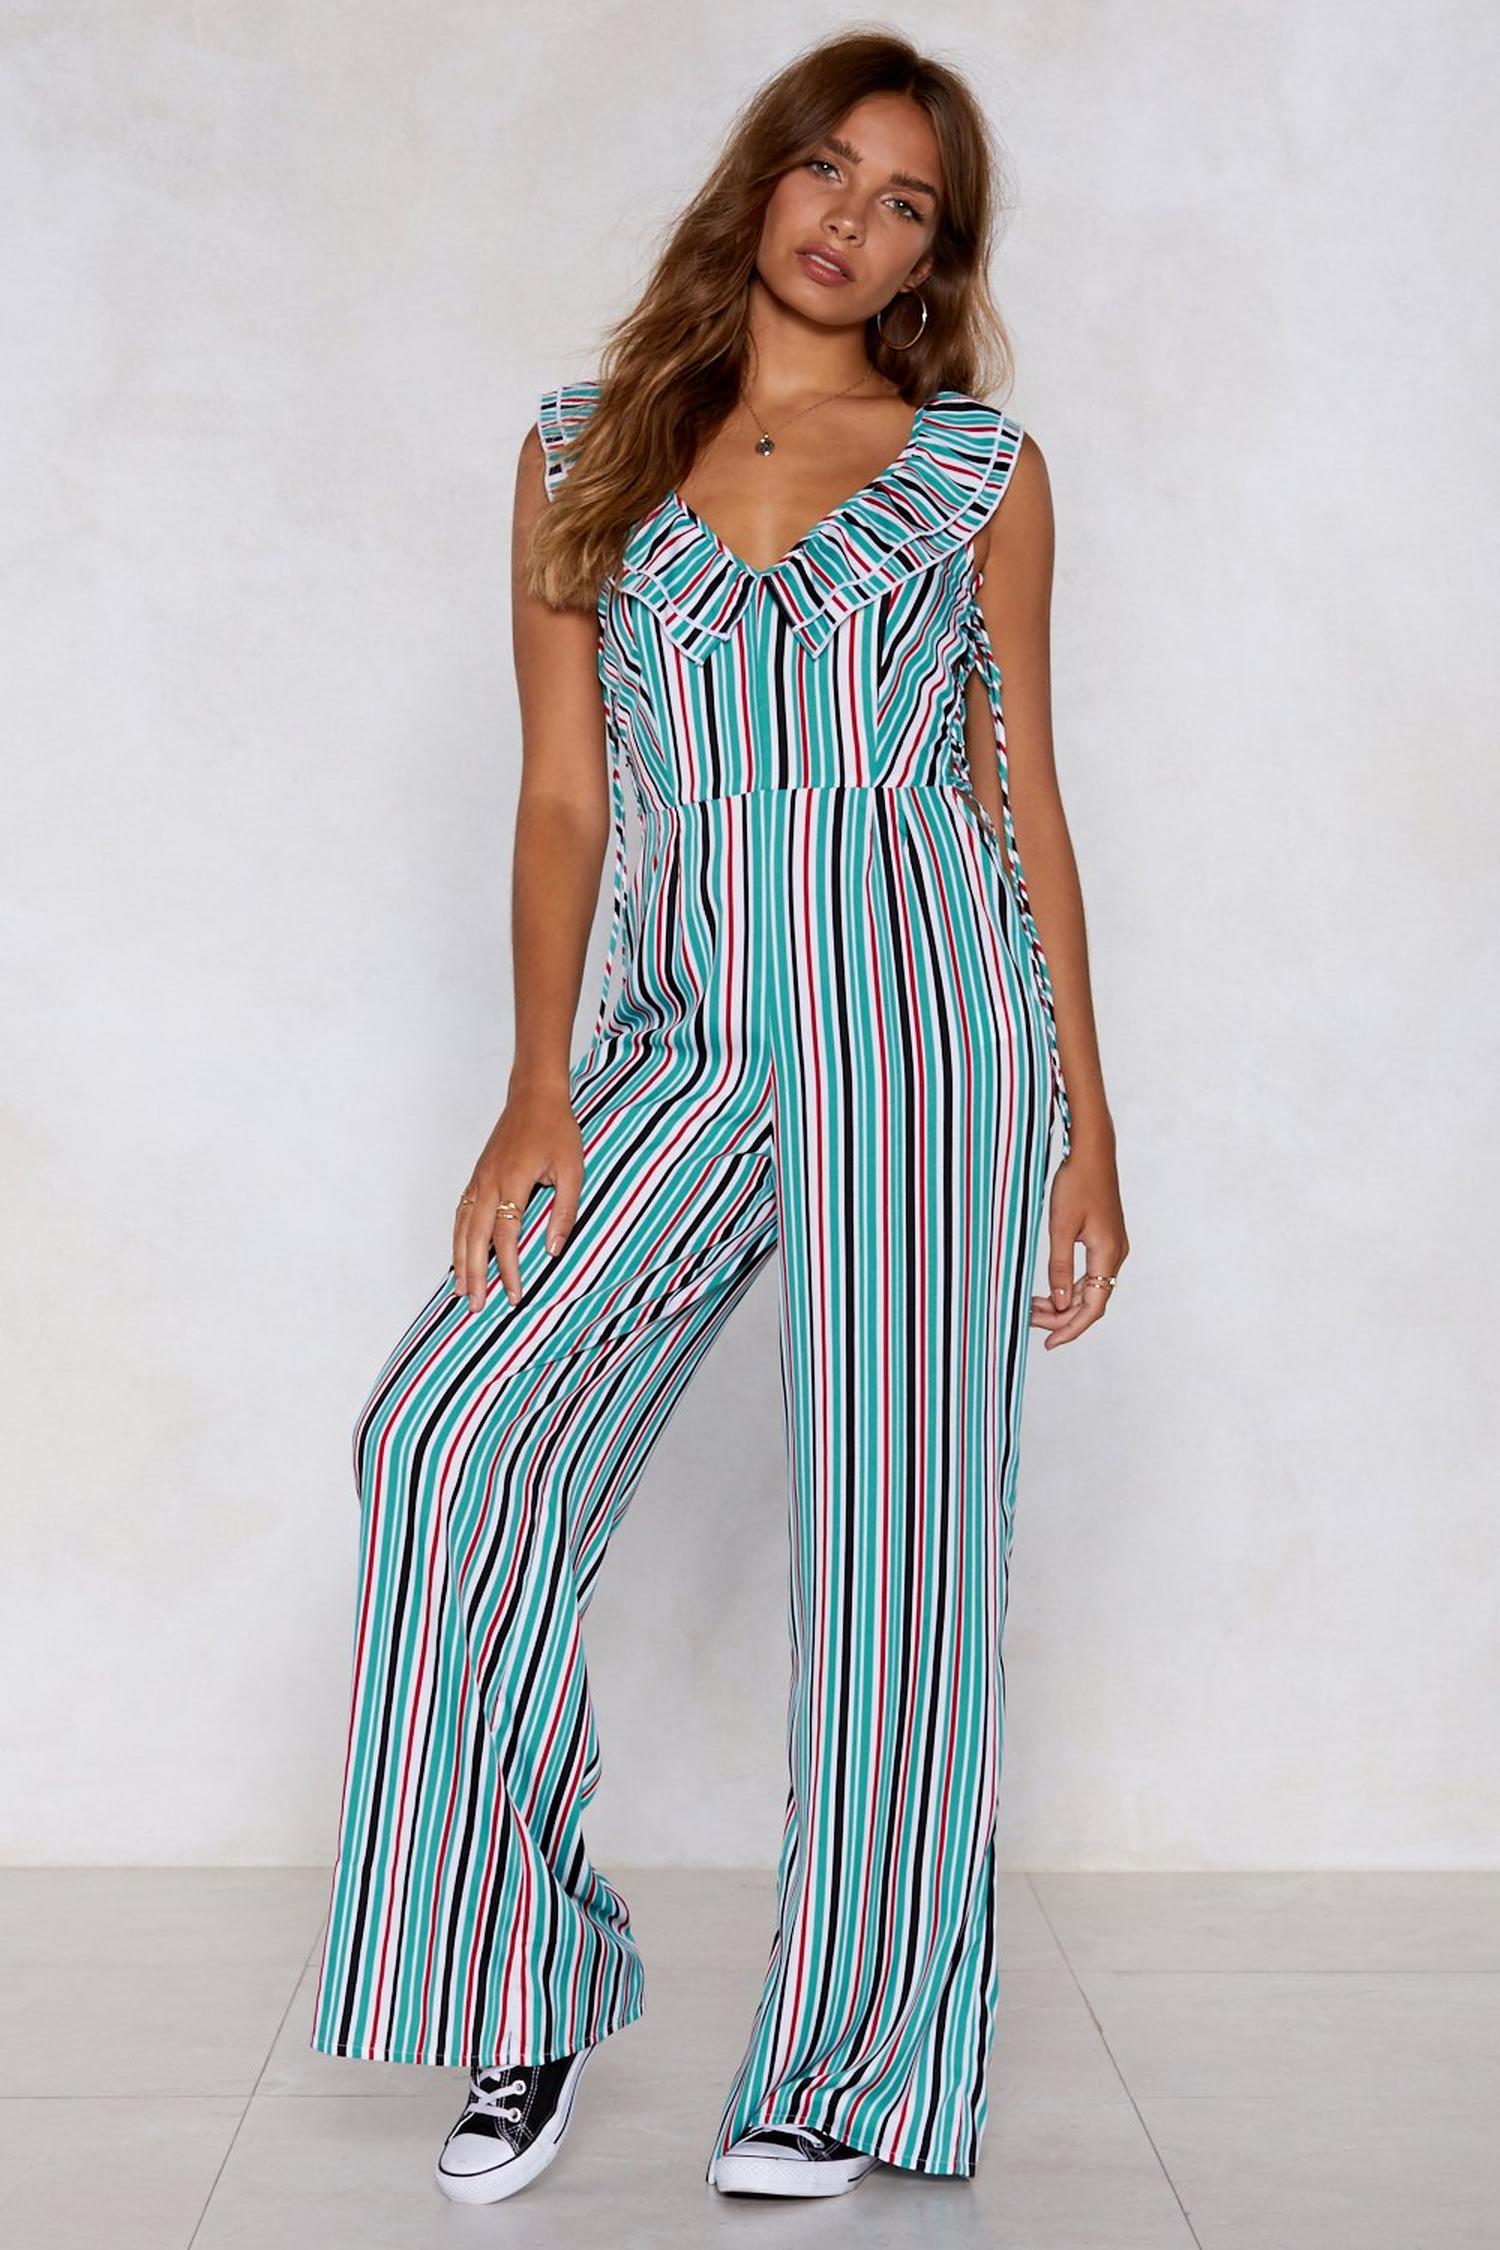 A Poet and You Didn't Know It Striped Jumpsuit | Nasty Gal